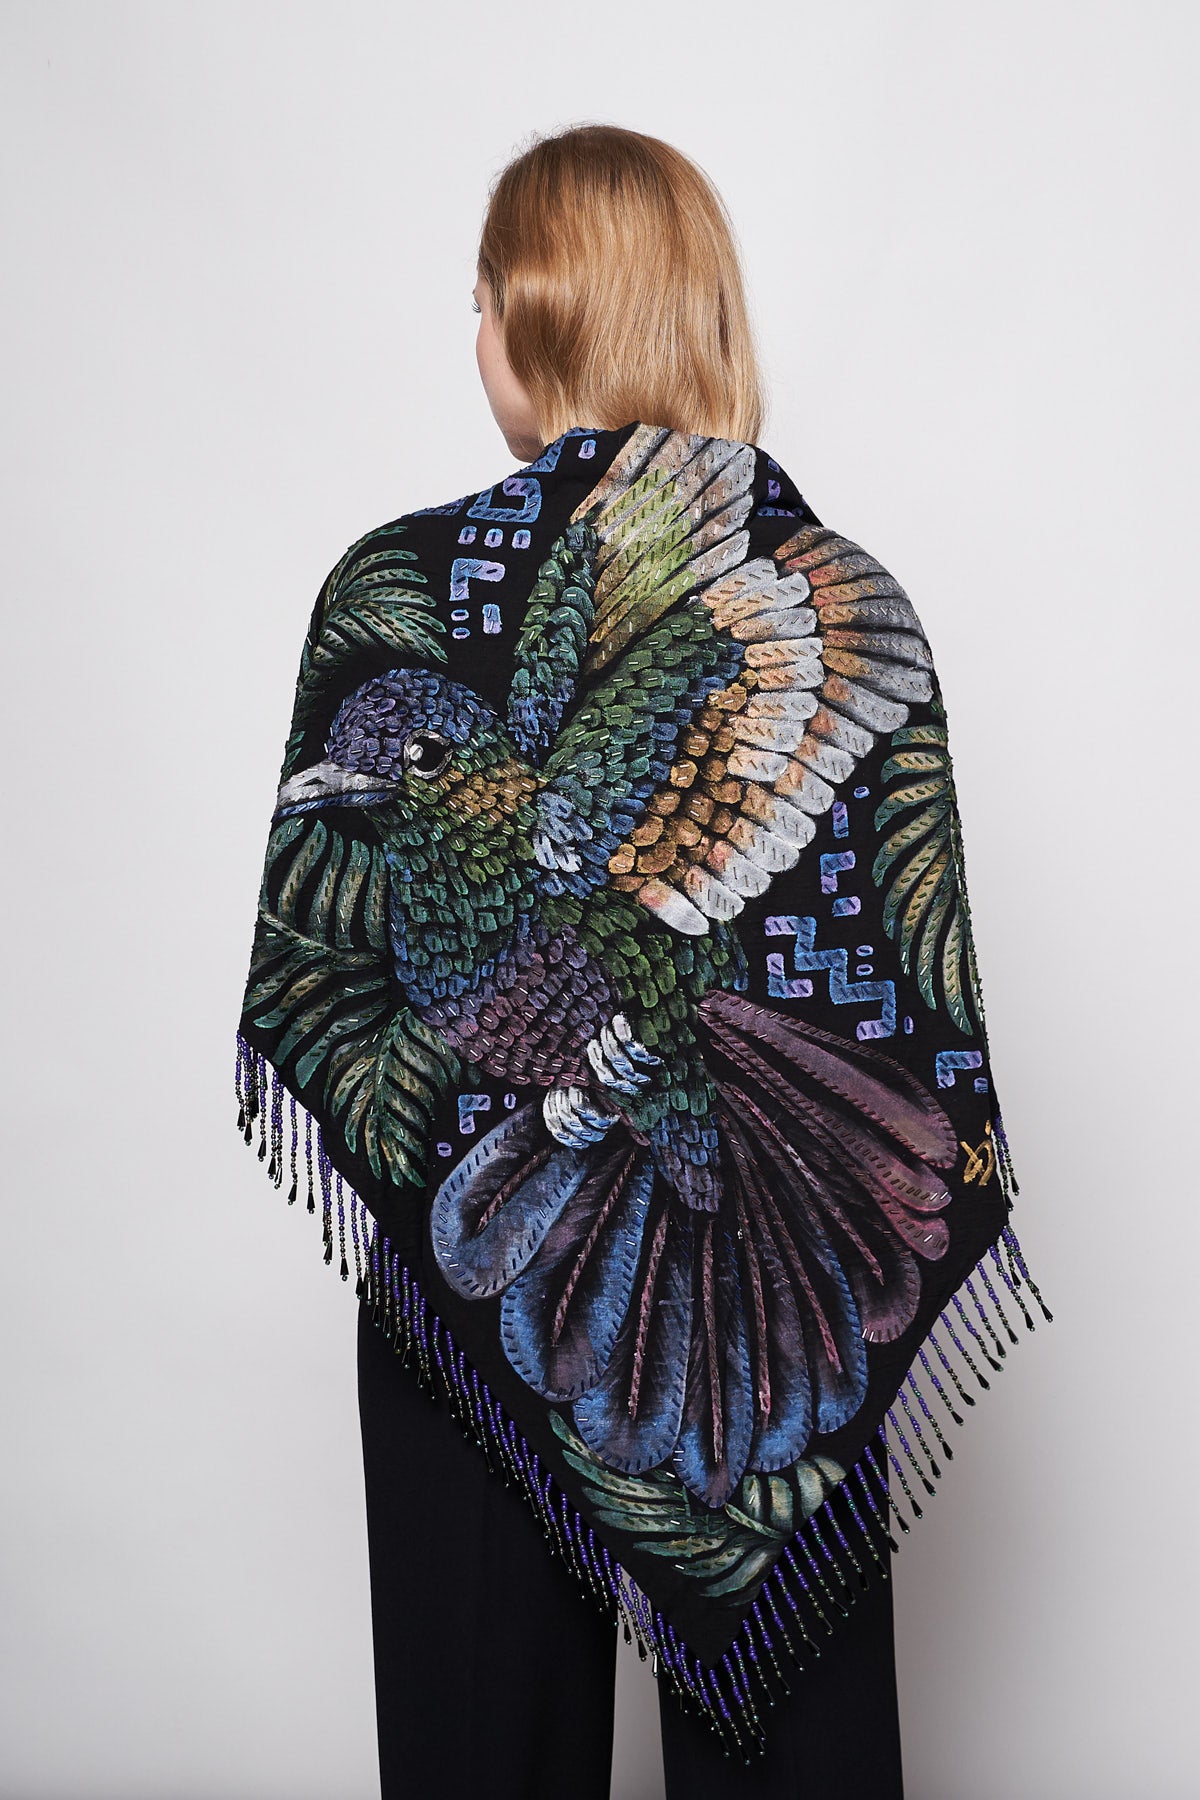 HAND-PAINTED AND HAND-EMBROIDERED TRIANGULAR SHAWL WITH BEADED FRINGE - COLIBRI